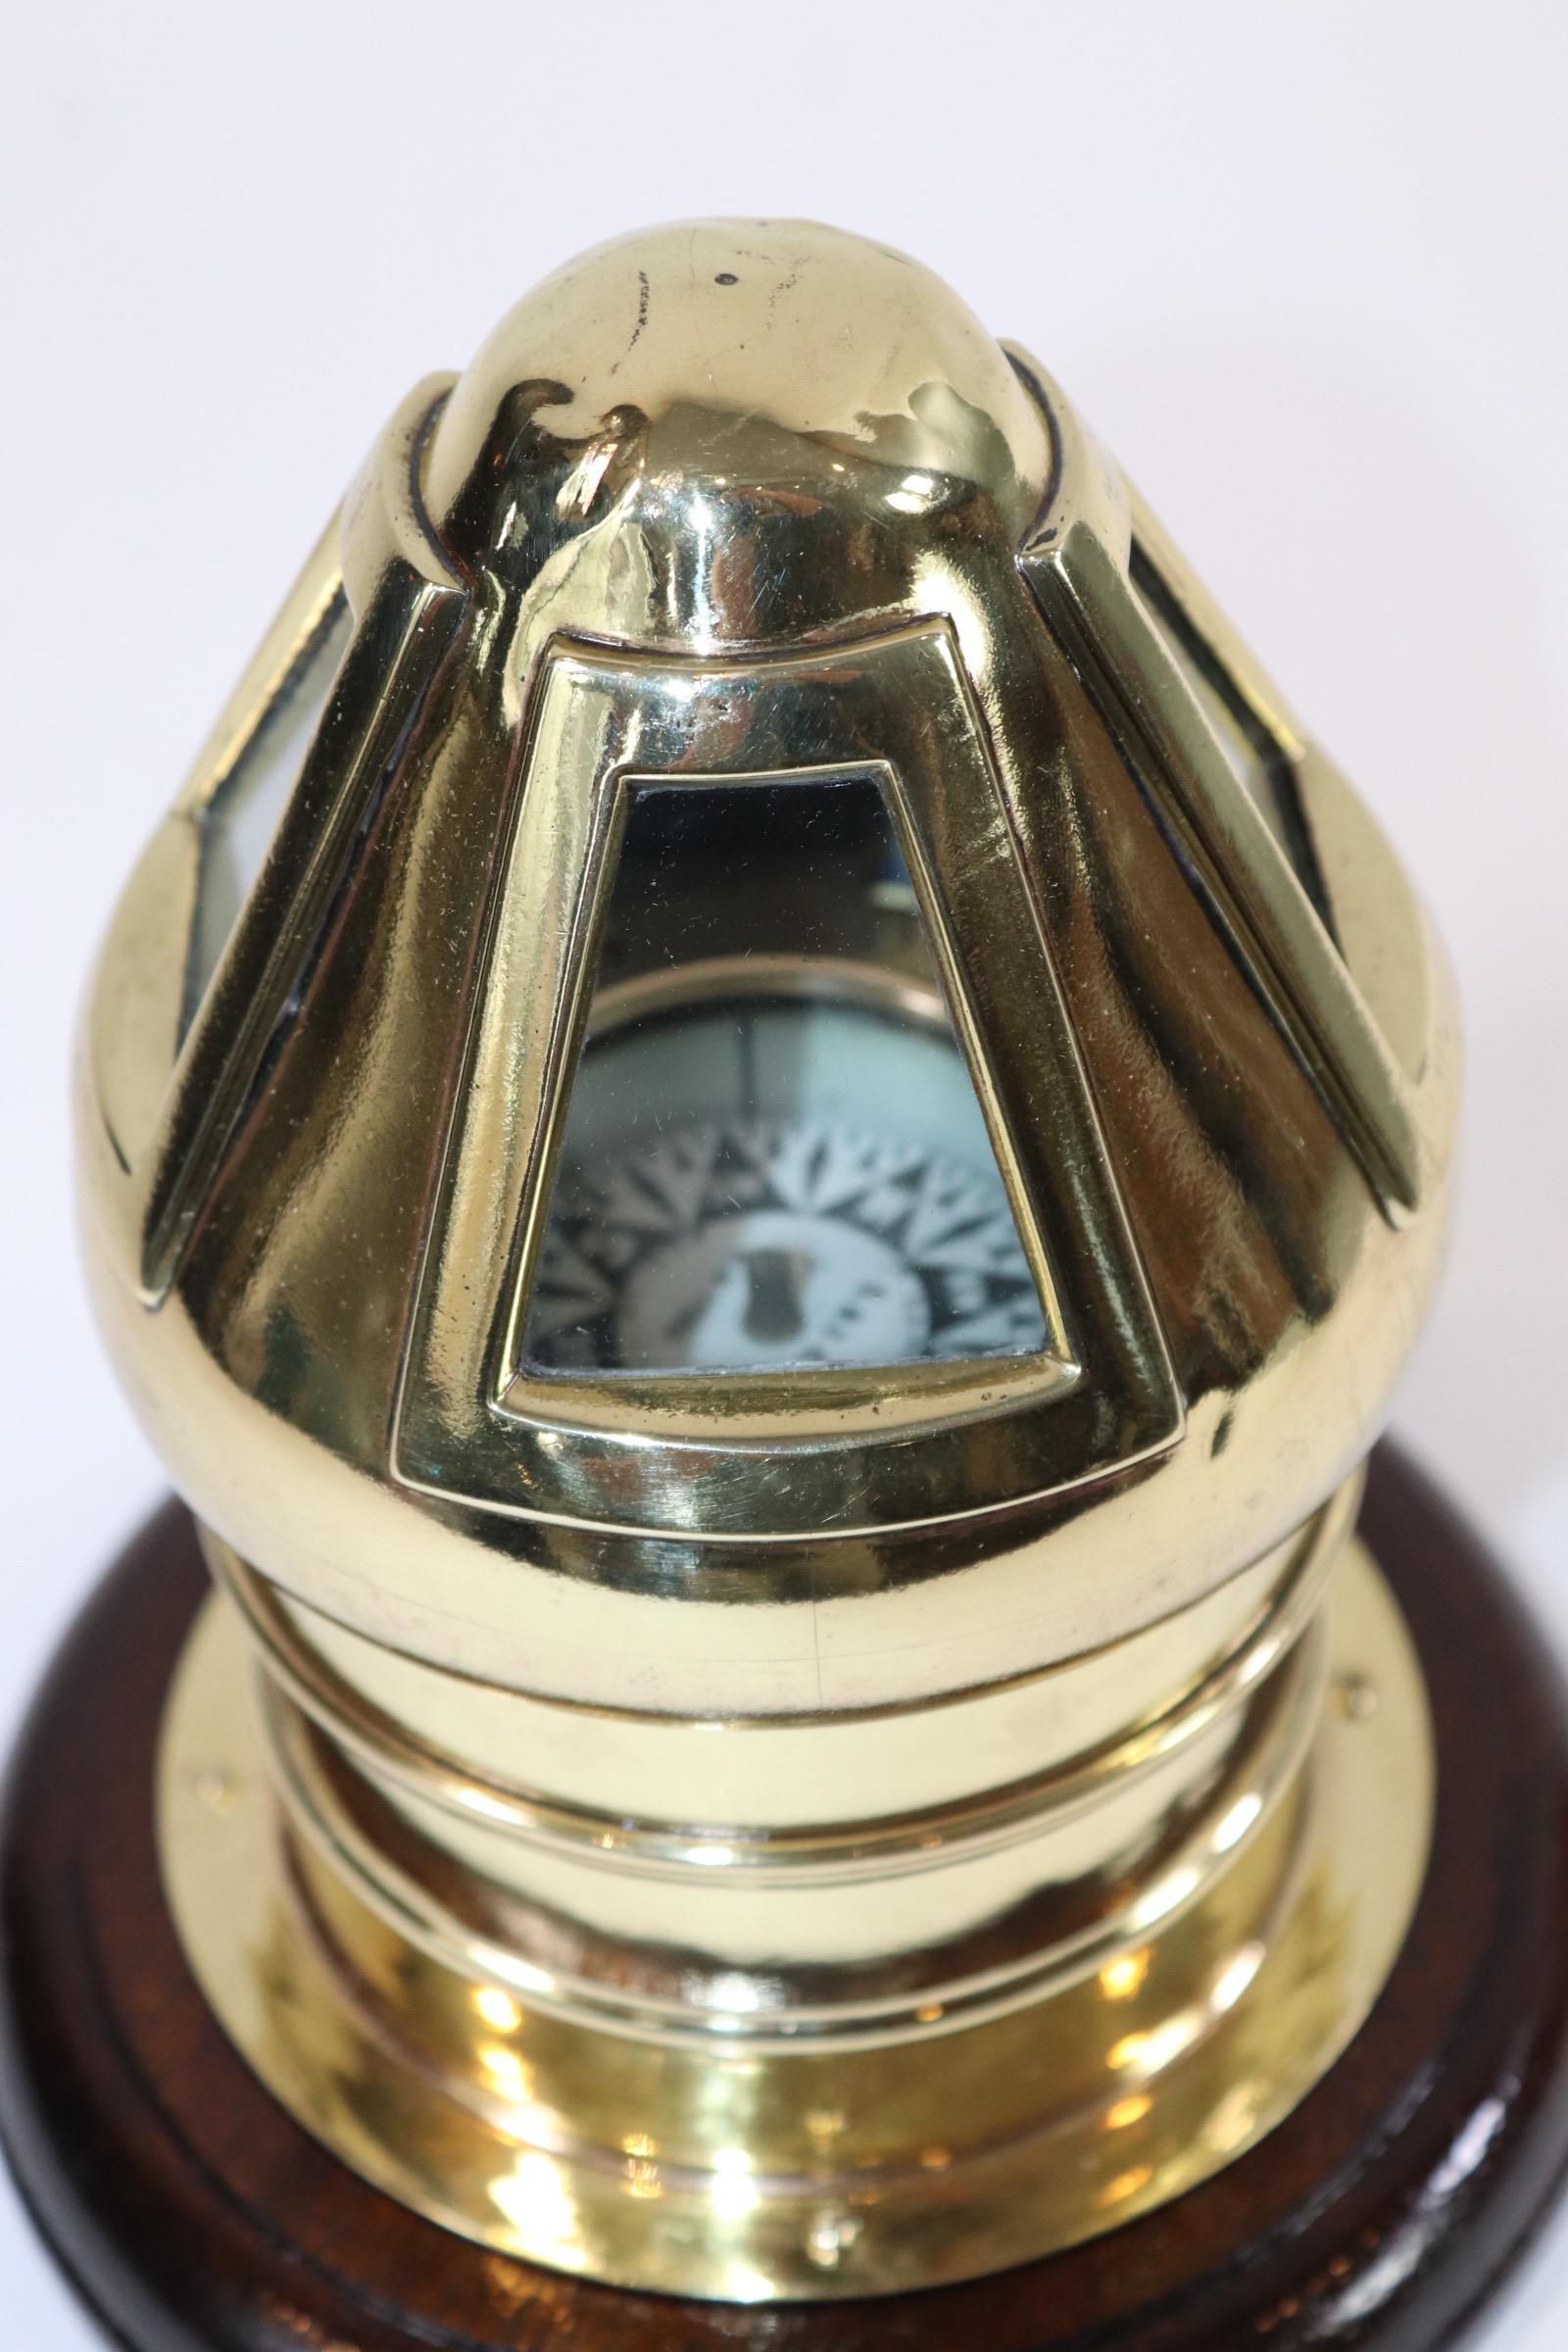 Solid brass yacht binnacle with gimbaled compass from E.S.Ritchie of Boston. Compass dates to the 19th century. The skylight top is fitted with four glass panes. Mounted to a varnished wood base. Weight is 4 pounds.